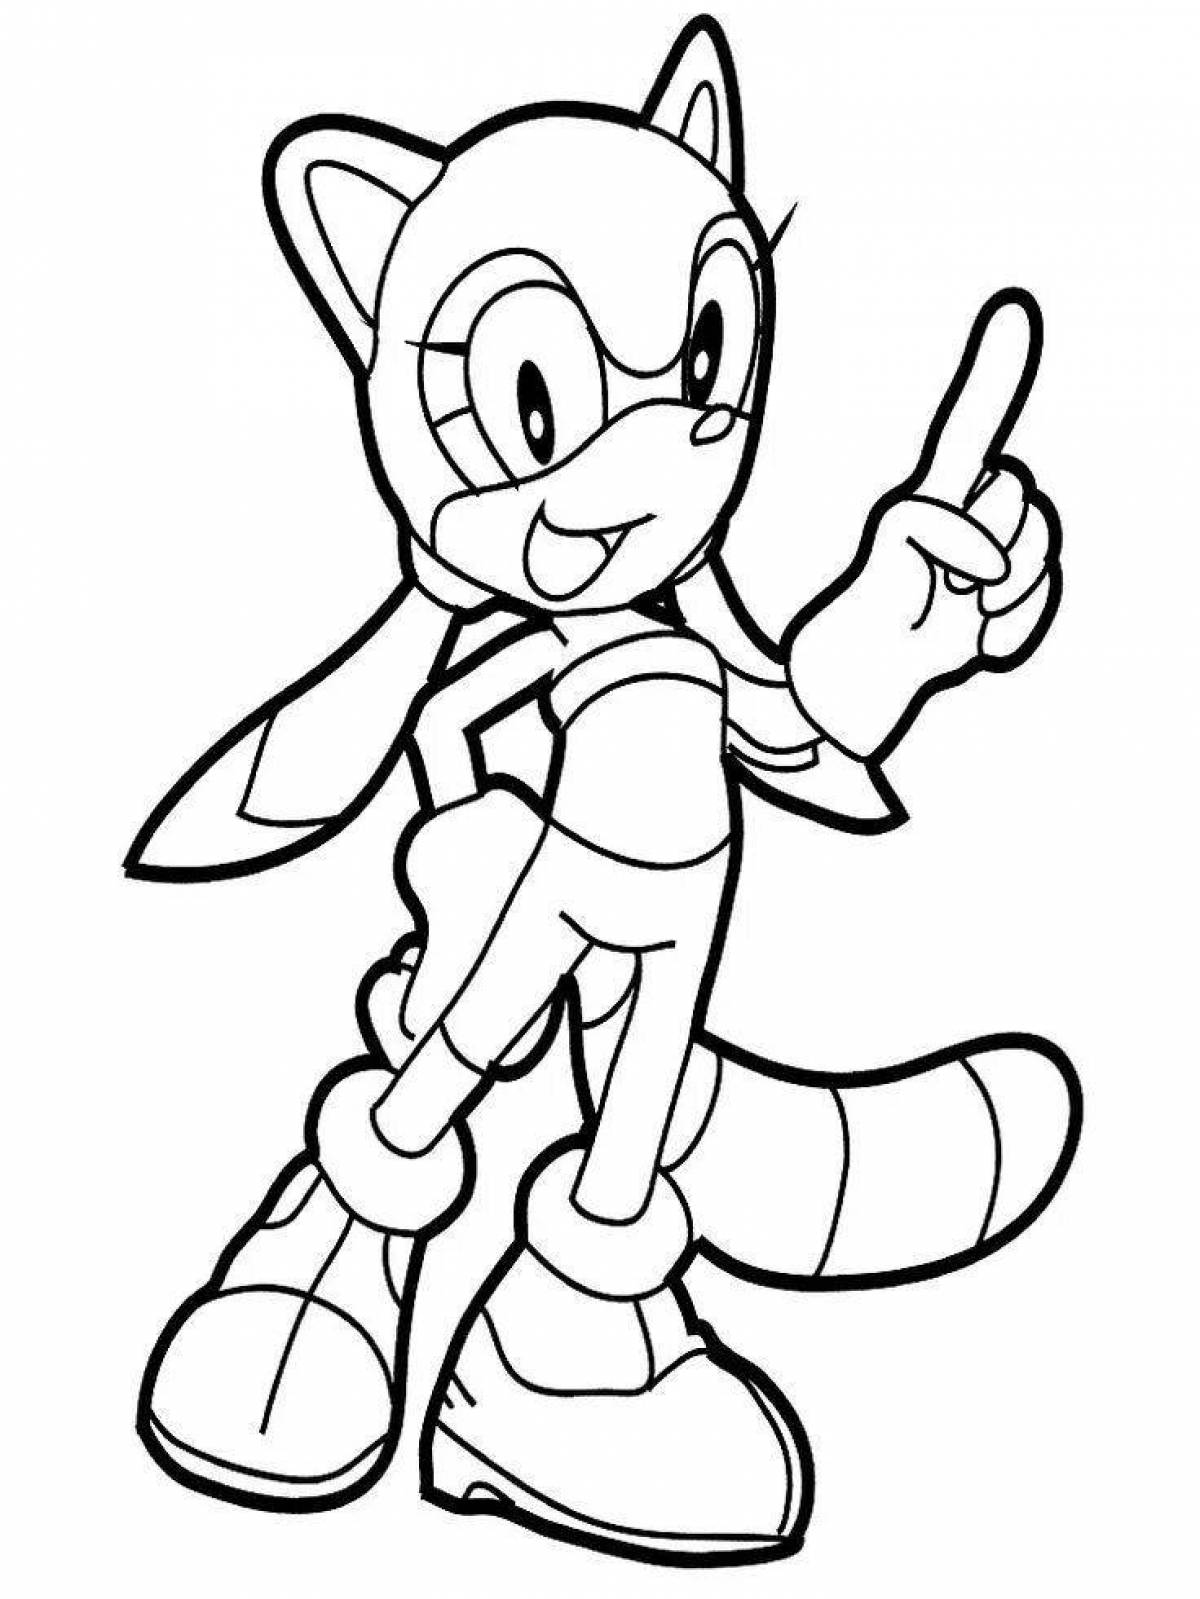 Funny coloring of white sonic